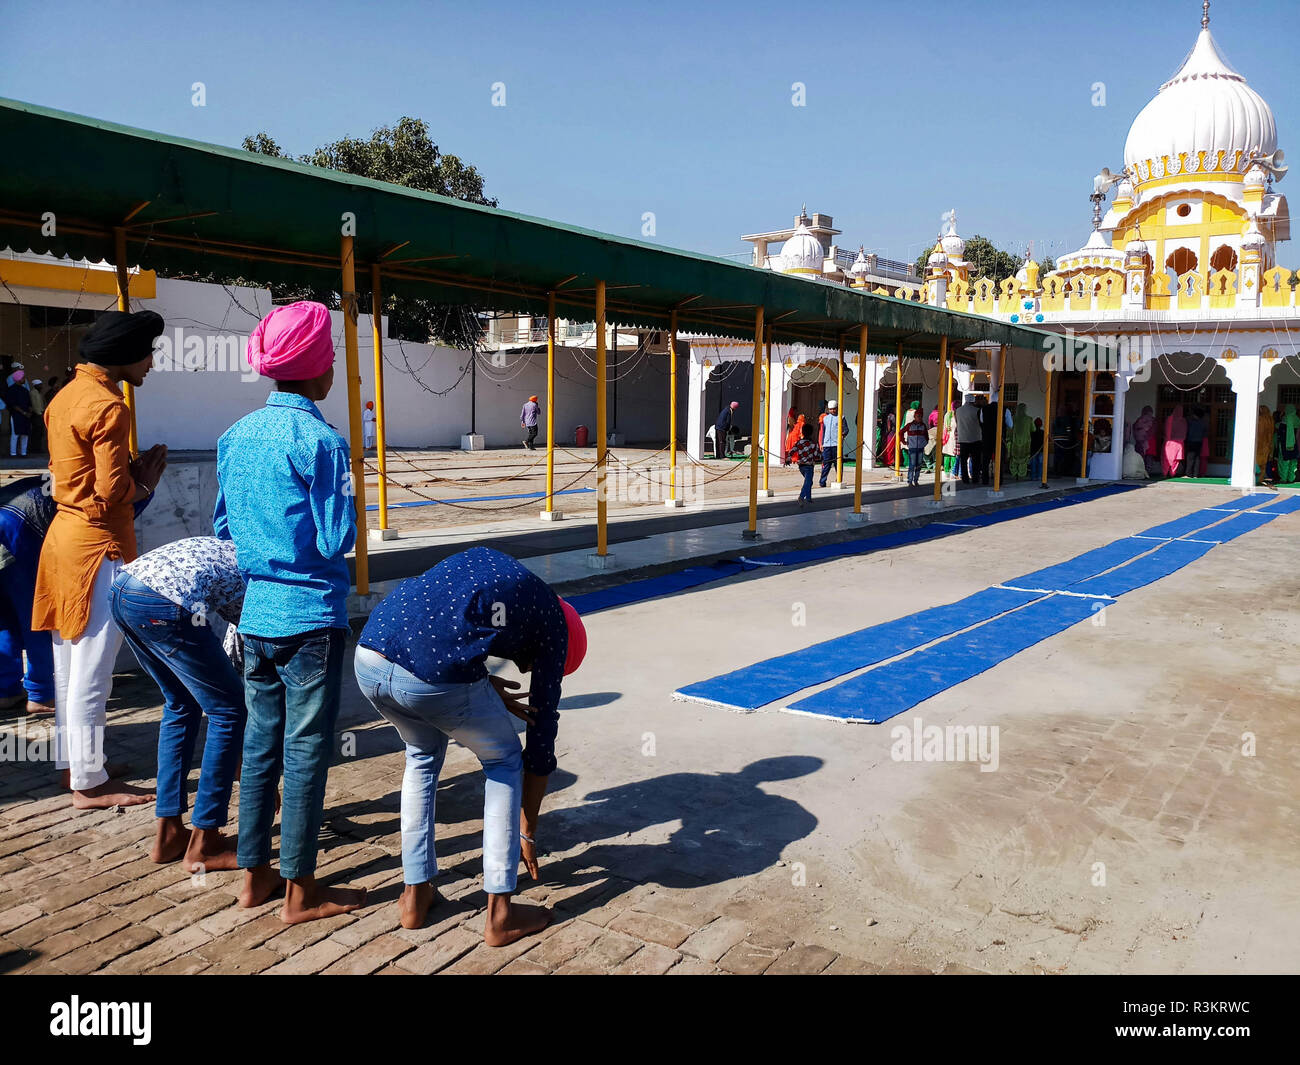 Mohali, Punjab, India. 23rd Nov, 2018. Devotees are seen paying obeisance at the Khanpur Gurduwara during the occasion of the 550th birth anniversary of Guru Nanak Dev in Mohali.Sikhism was founded in the 15th century by Guru Nanak, who broke away from Hinduism, India's dominant religion, He preached the equality of races and genders and the rejection of image-worship and the caste system. Credit: Saqib Majeed/SOPA Images/ZUMA Wire/Alamy Live News Stock Photo